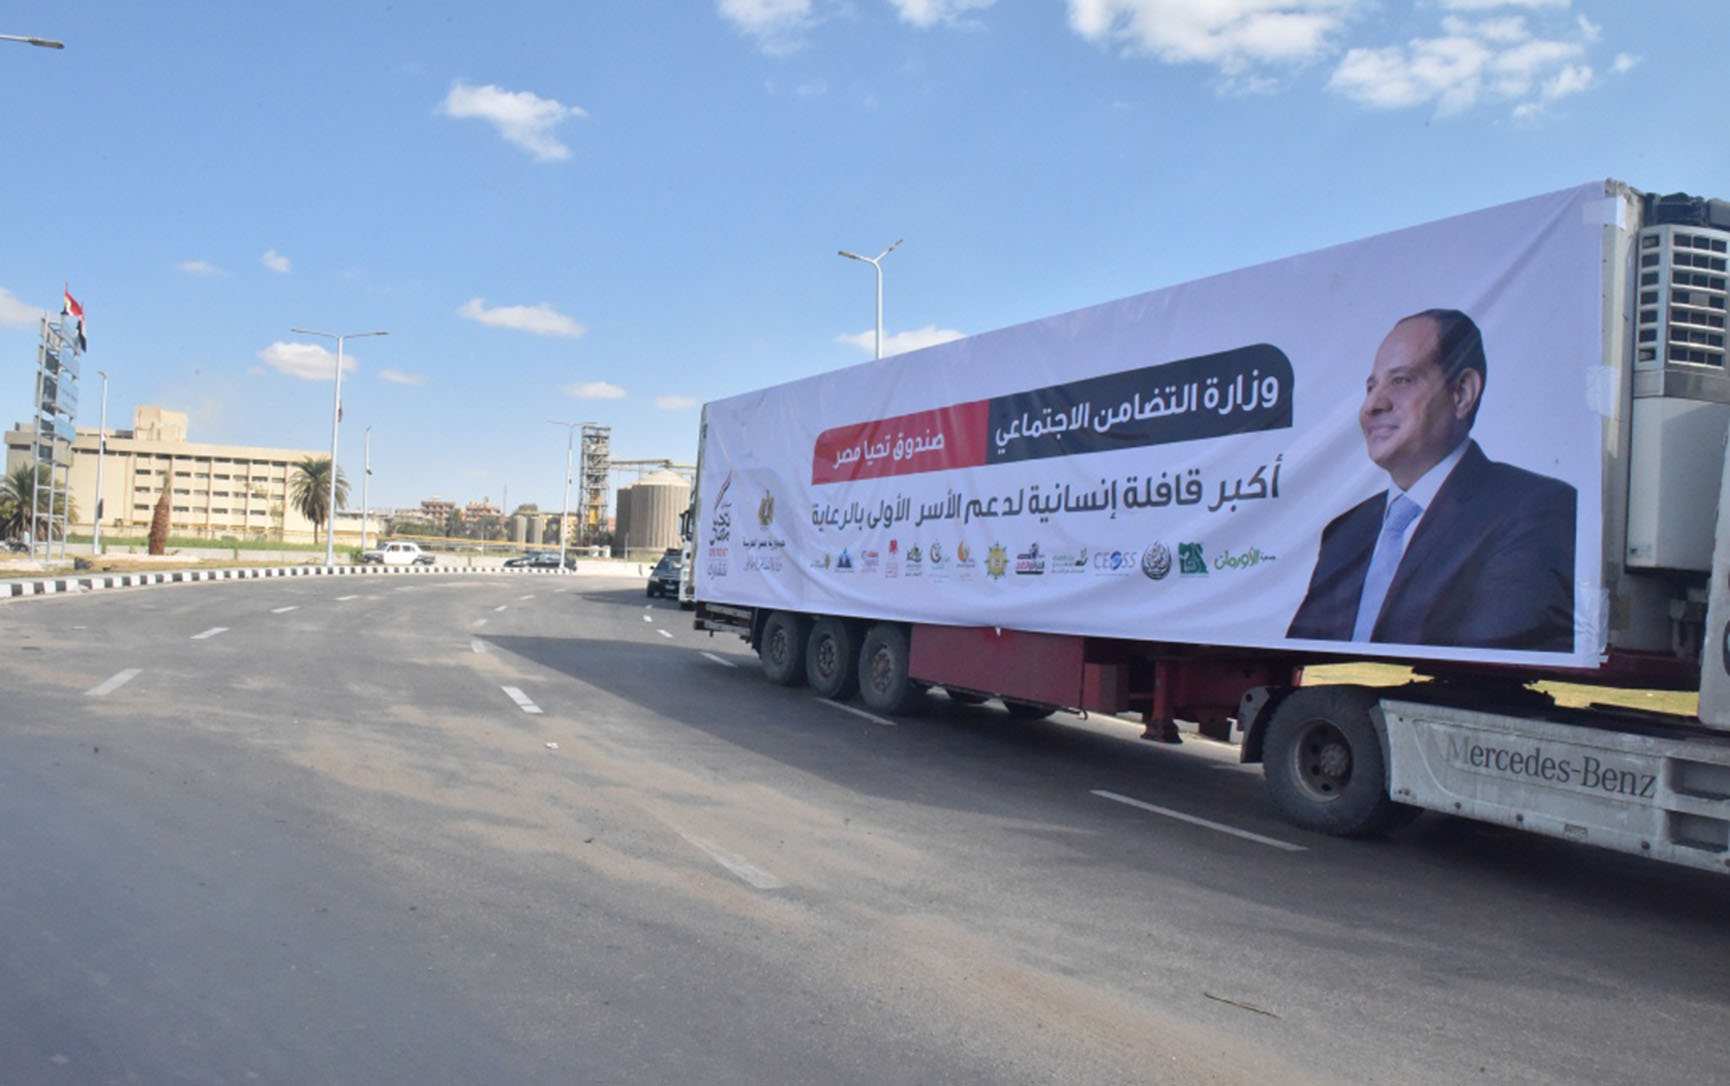 ELARABY Group participates in the largest humanitarian convoy in the world to take care of one million families from the cold of winter